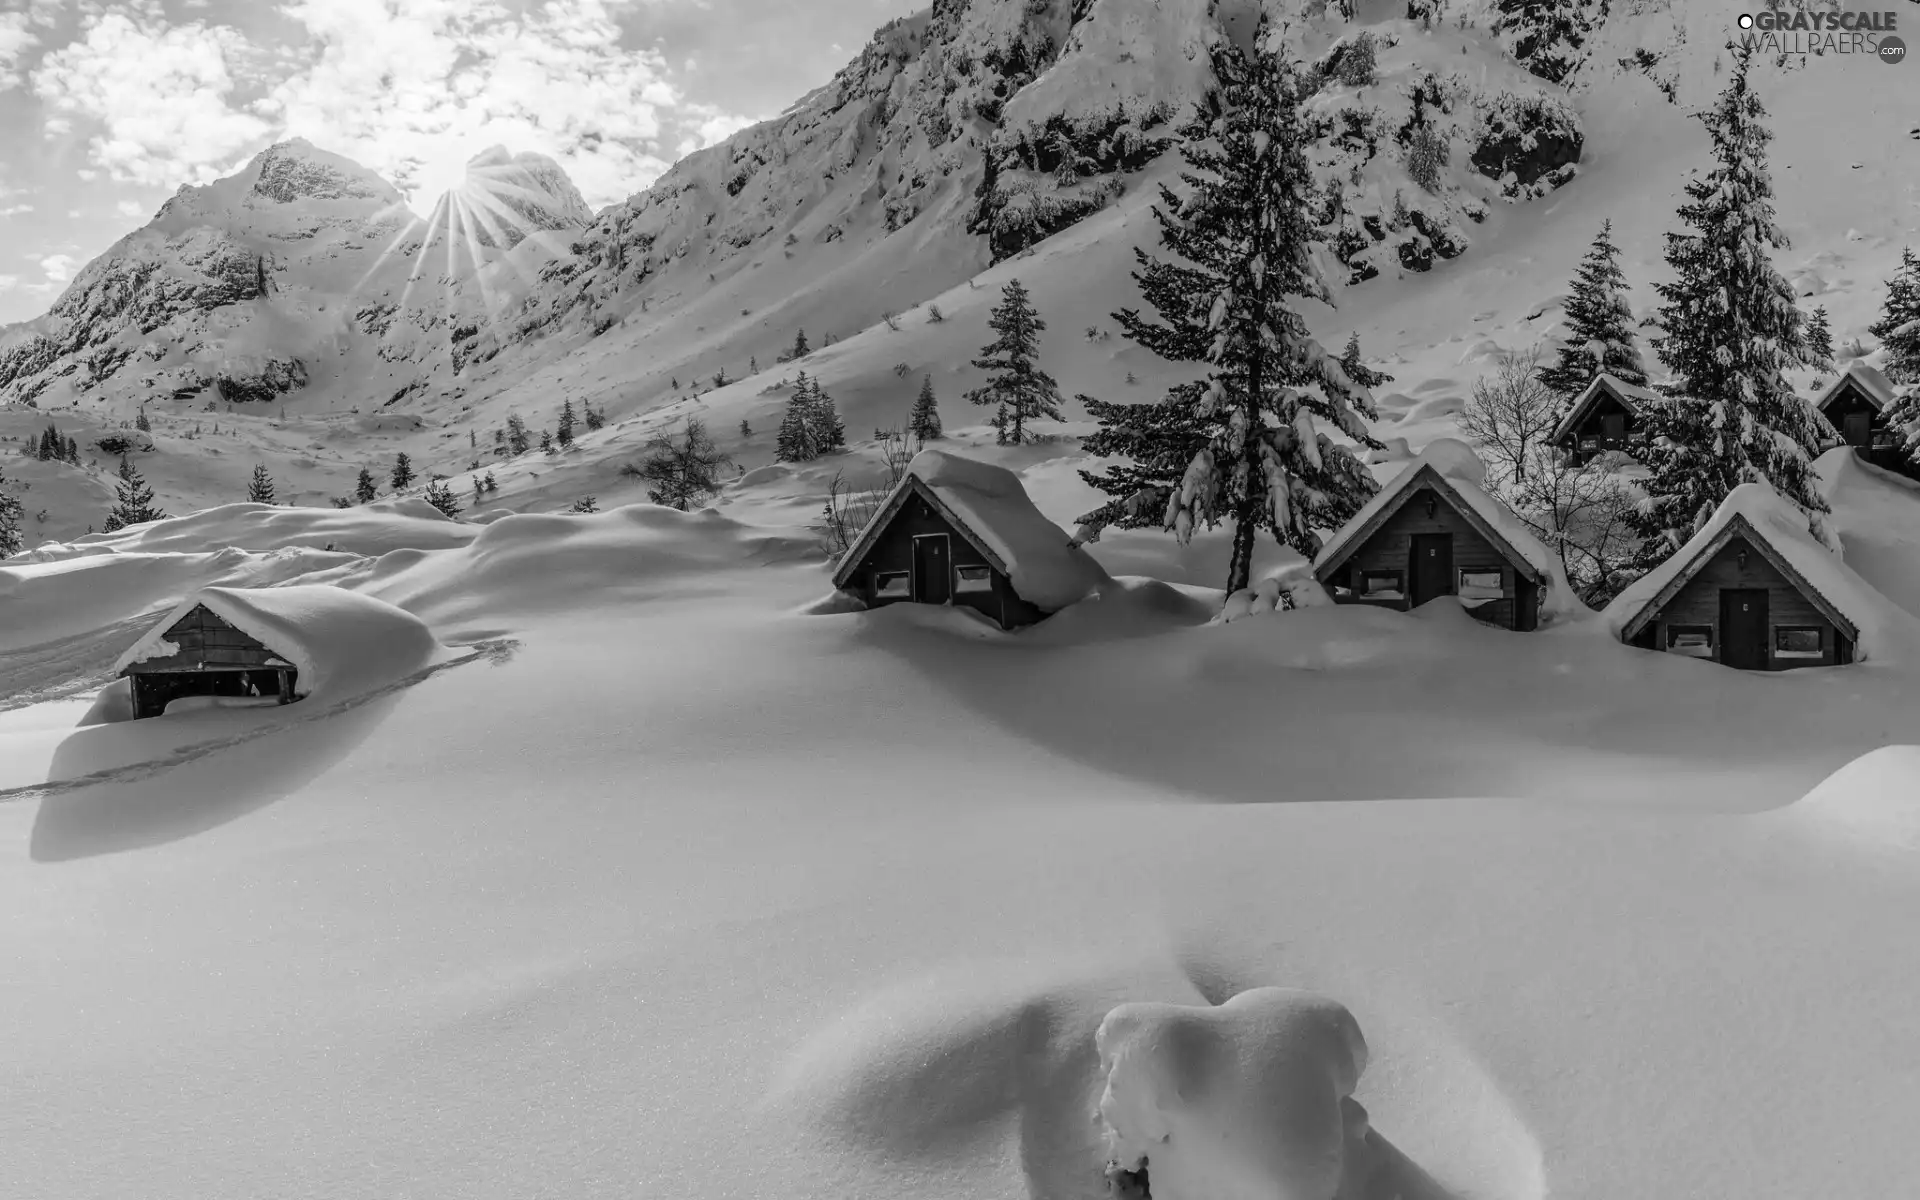 drifts, snow, huts, viewes, Houses, winter, Mountains, rays of the Sun, trees, car in the meadow